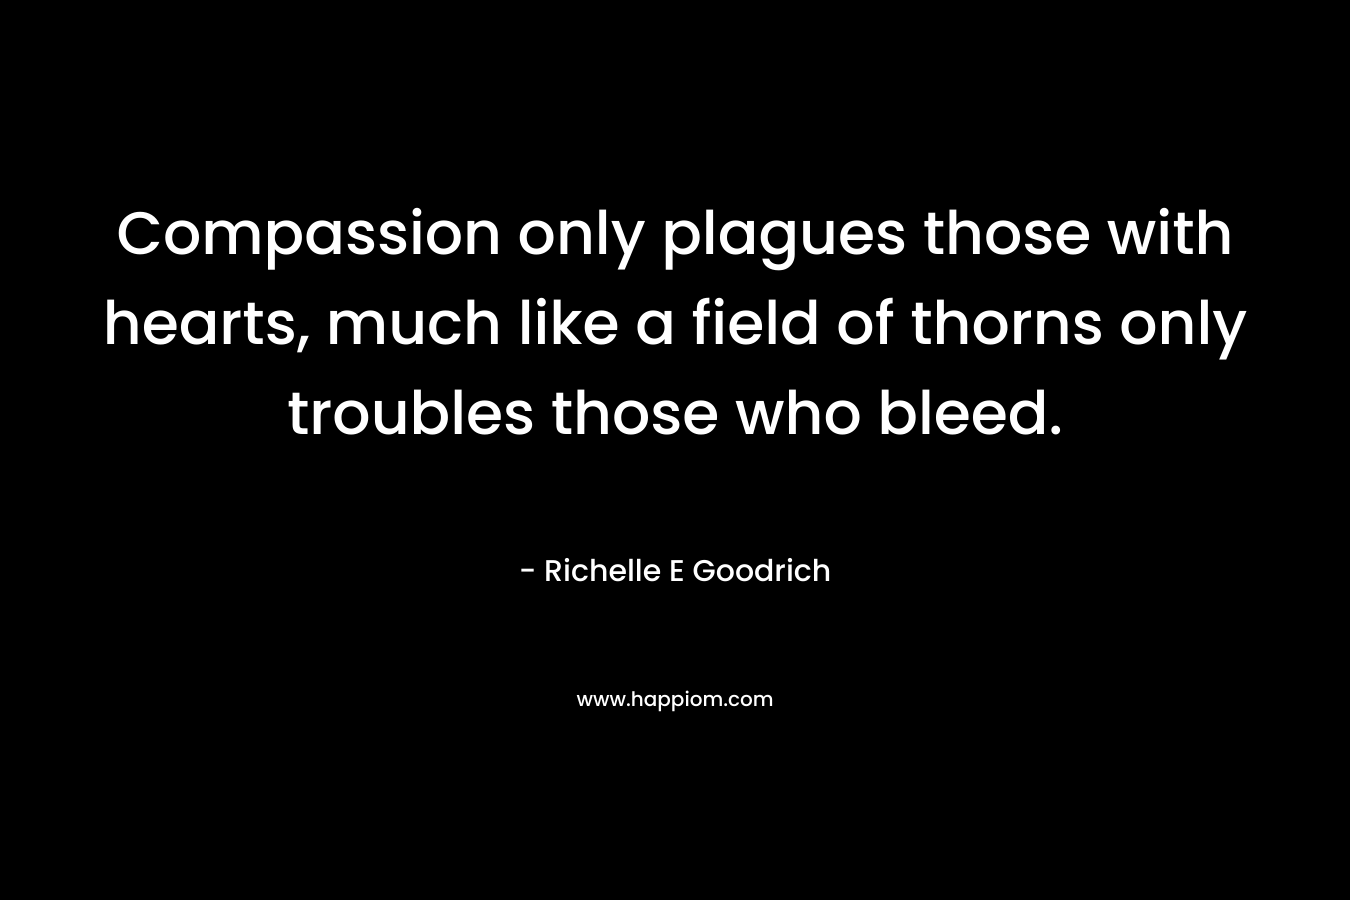 Compassion only plagues those with hearts, much like a field of thorns only troubles those who bleed. – Richelle E Goodrich